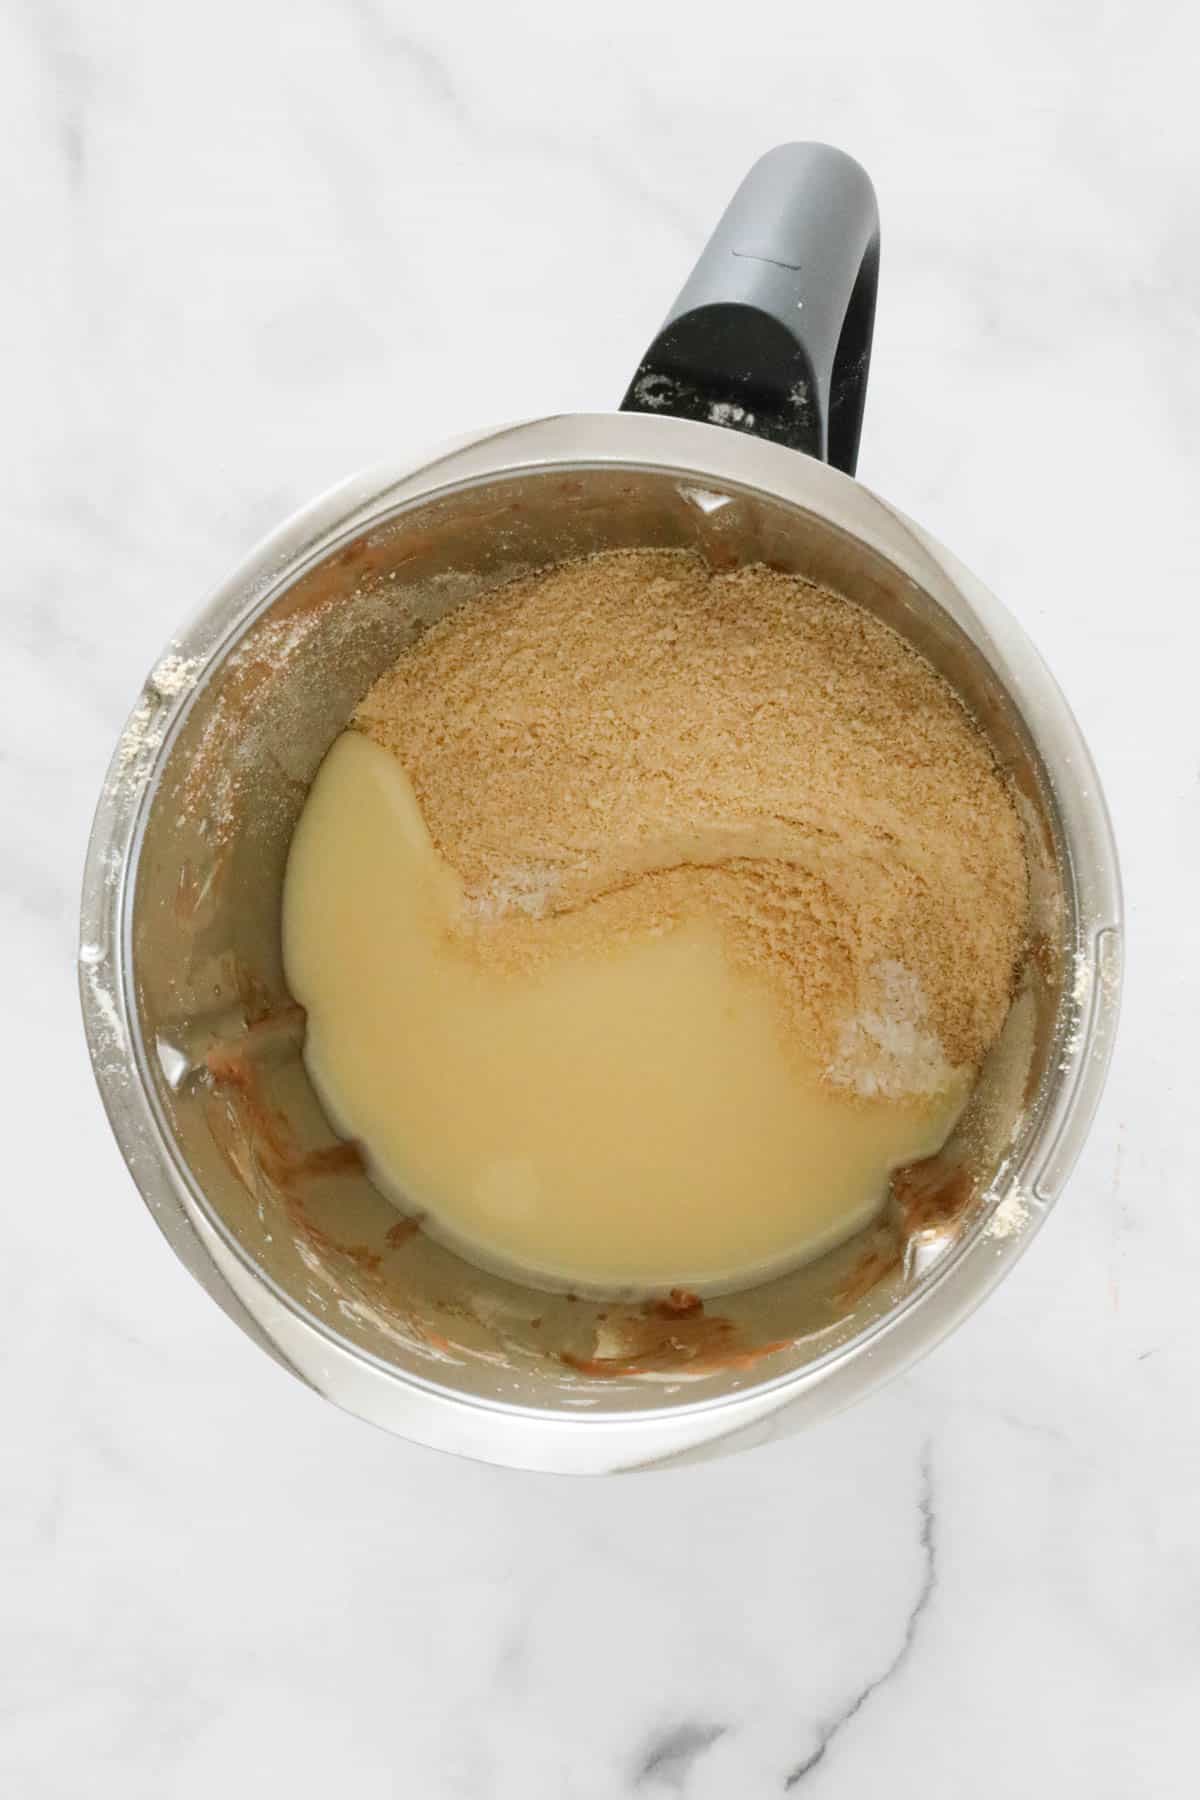 Crushed biscuits and sweetened condensed milk in a Thermomix.